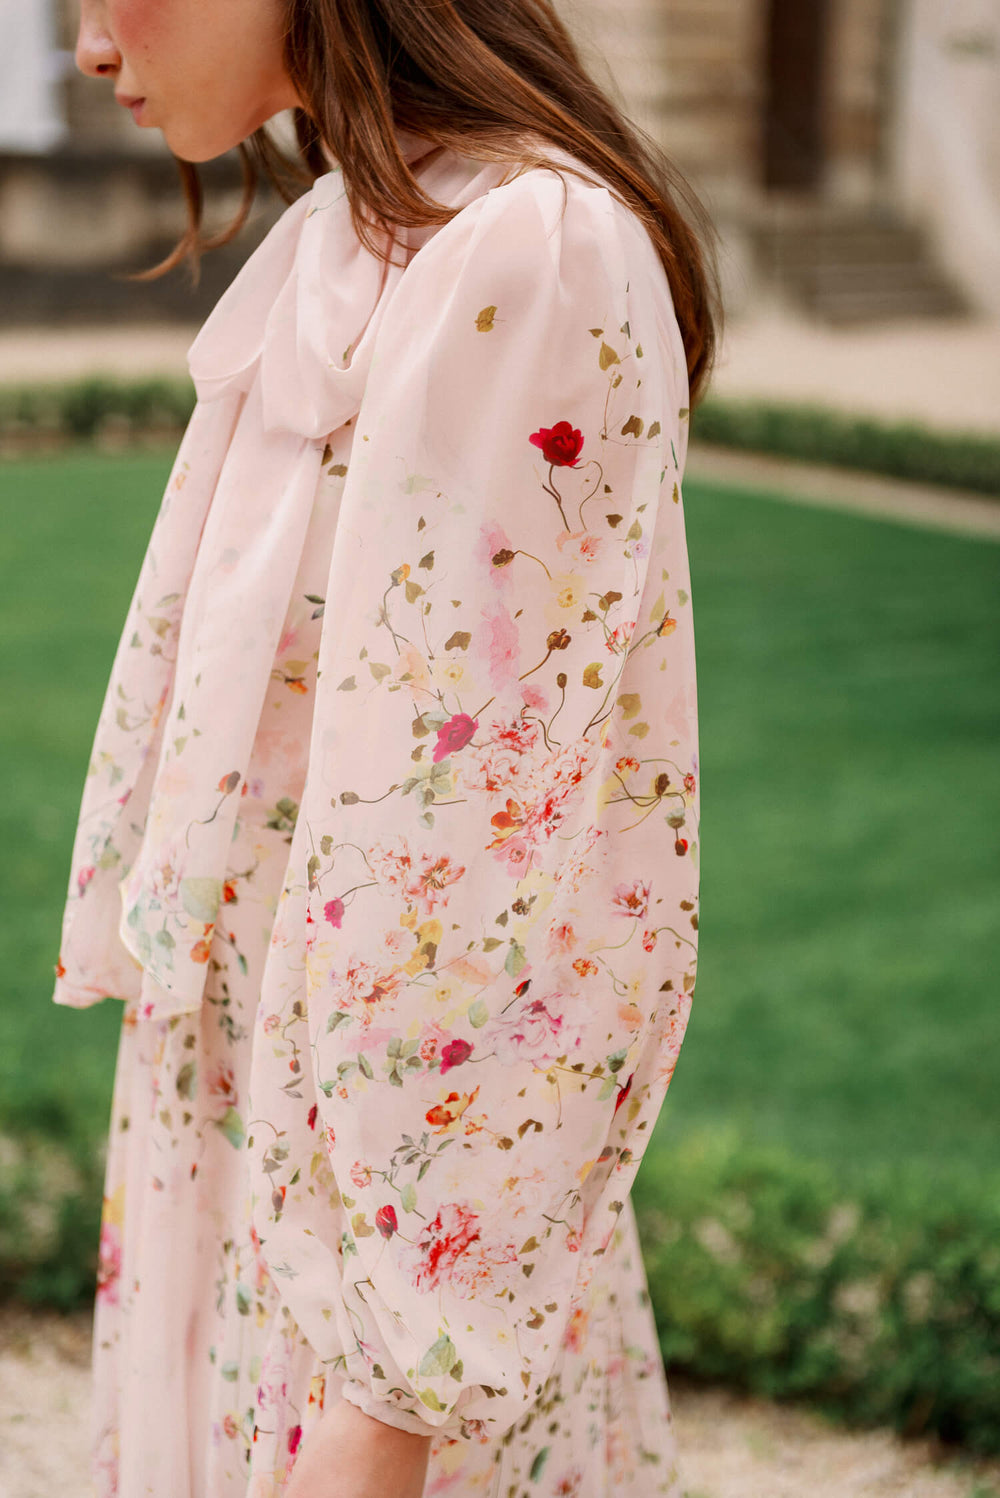 Monique Lhuillier Spring 2024 long sleeve gown with attached necktie and gathered waist in buff floral printed chiffon.